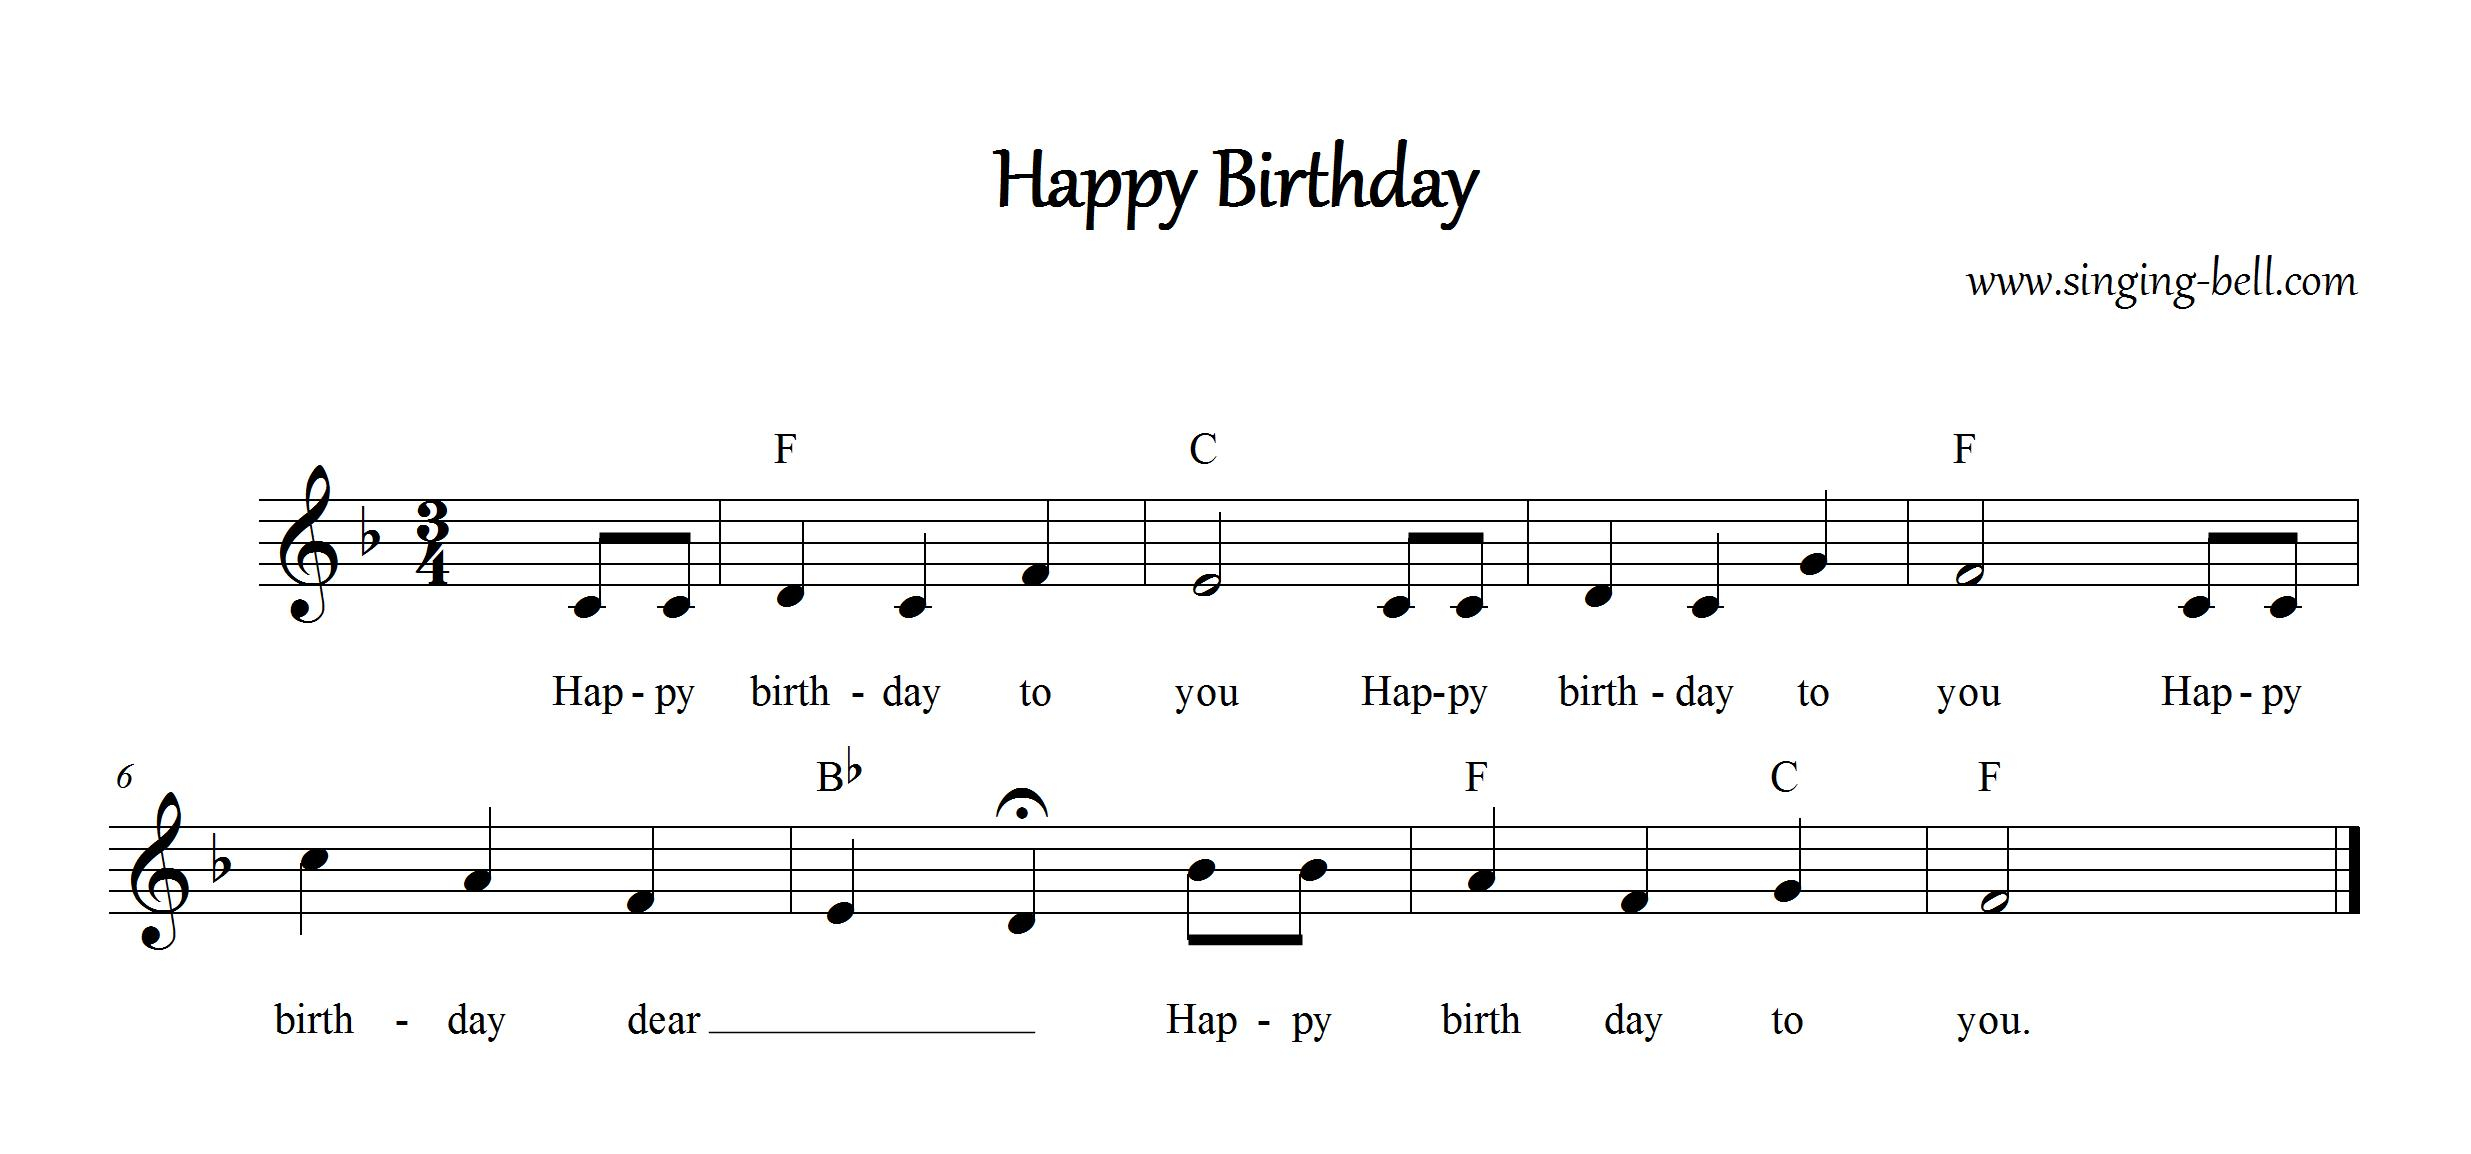 Happy Birthday Chords Happy Birthday To You 7 Free Karaoke Versions To Download